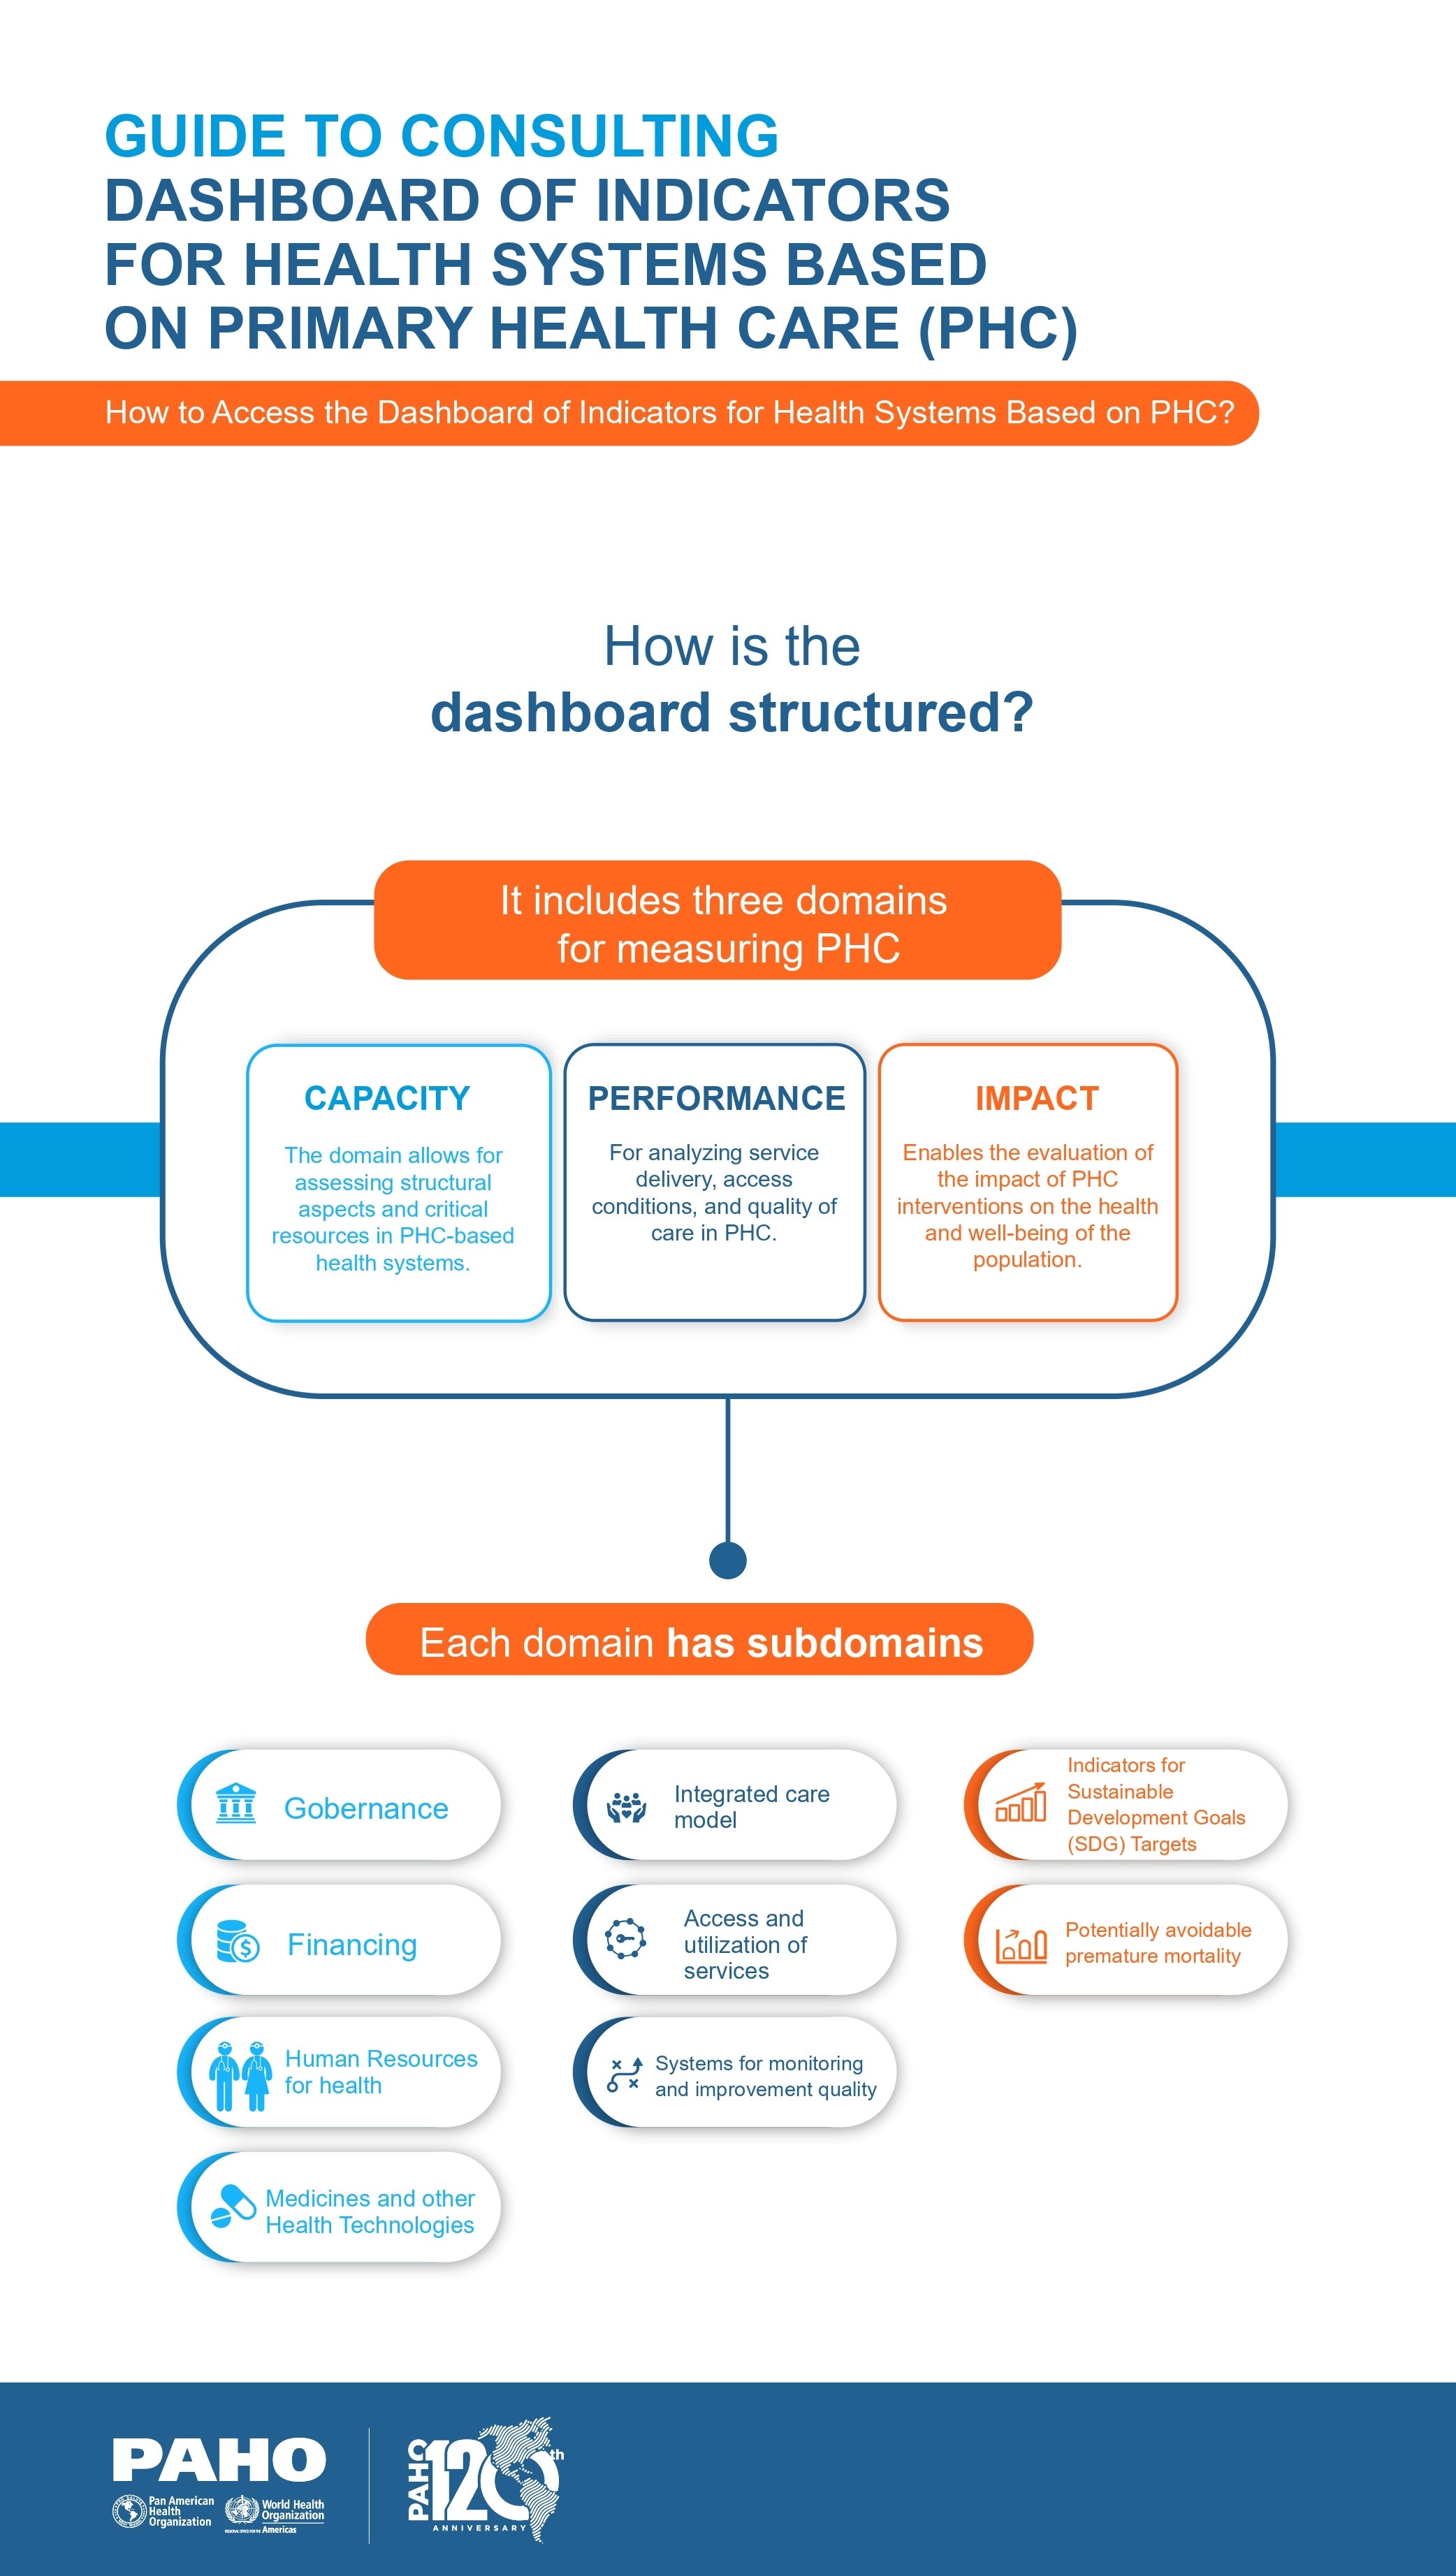 Reference guide to dashboard structure indicators.